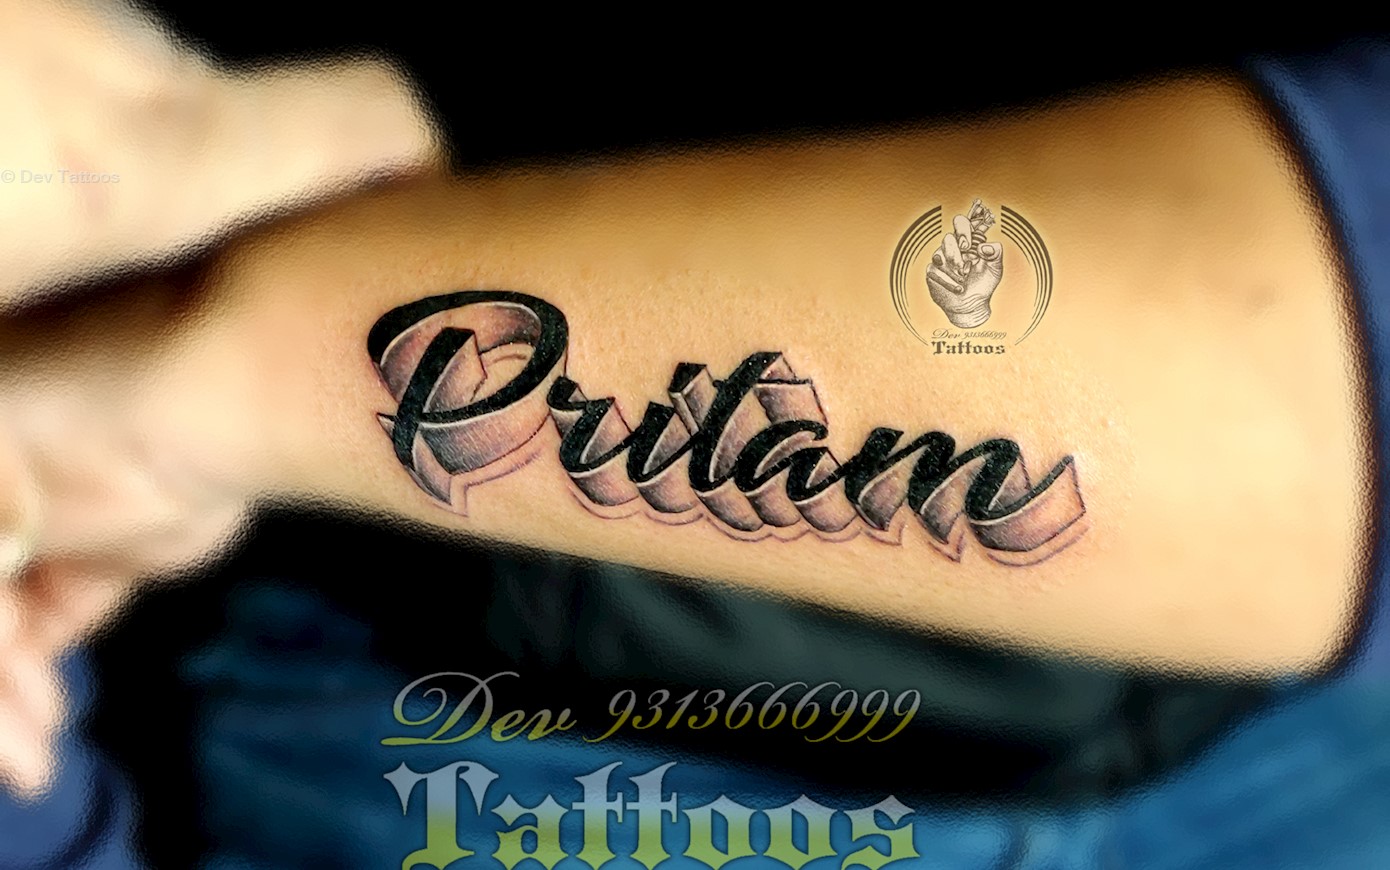 Conservative Modern Tattoo Design for a Company by Aymane J  Design  20910768